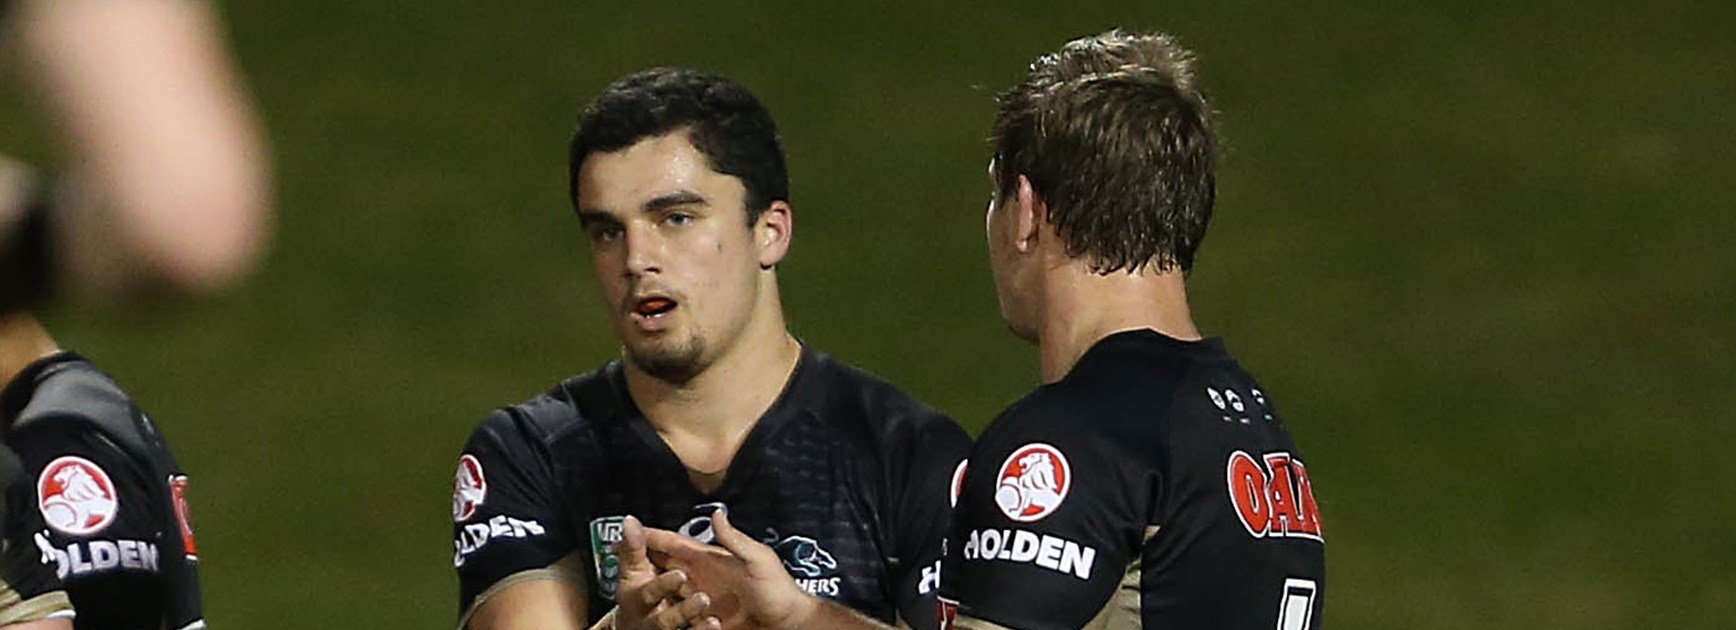 The Penrith Panthers under-20s side have won 12 straight Holden Cup matches.